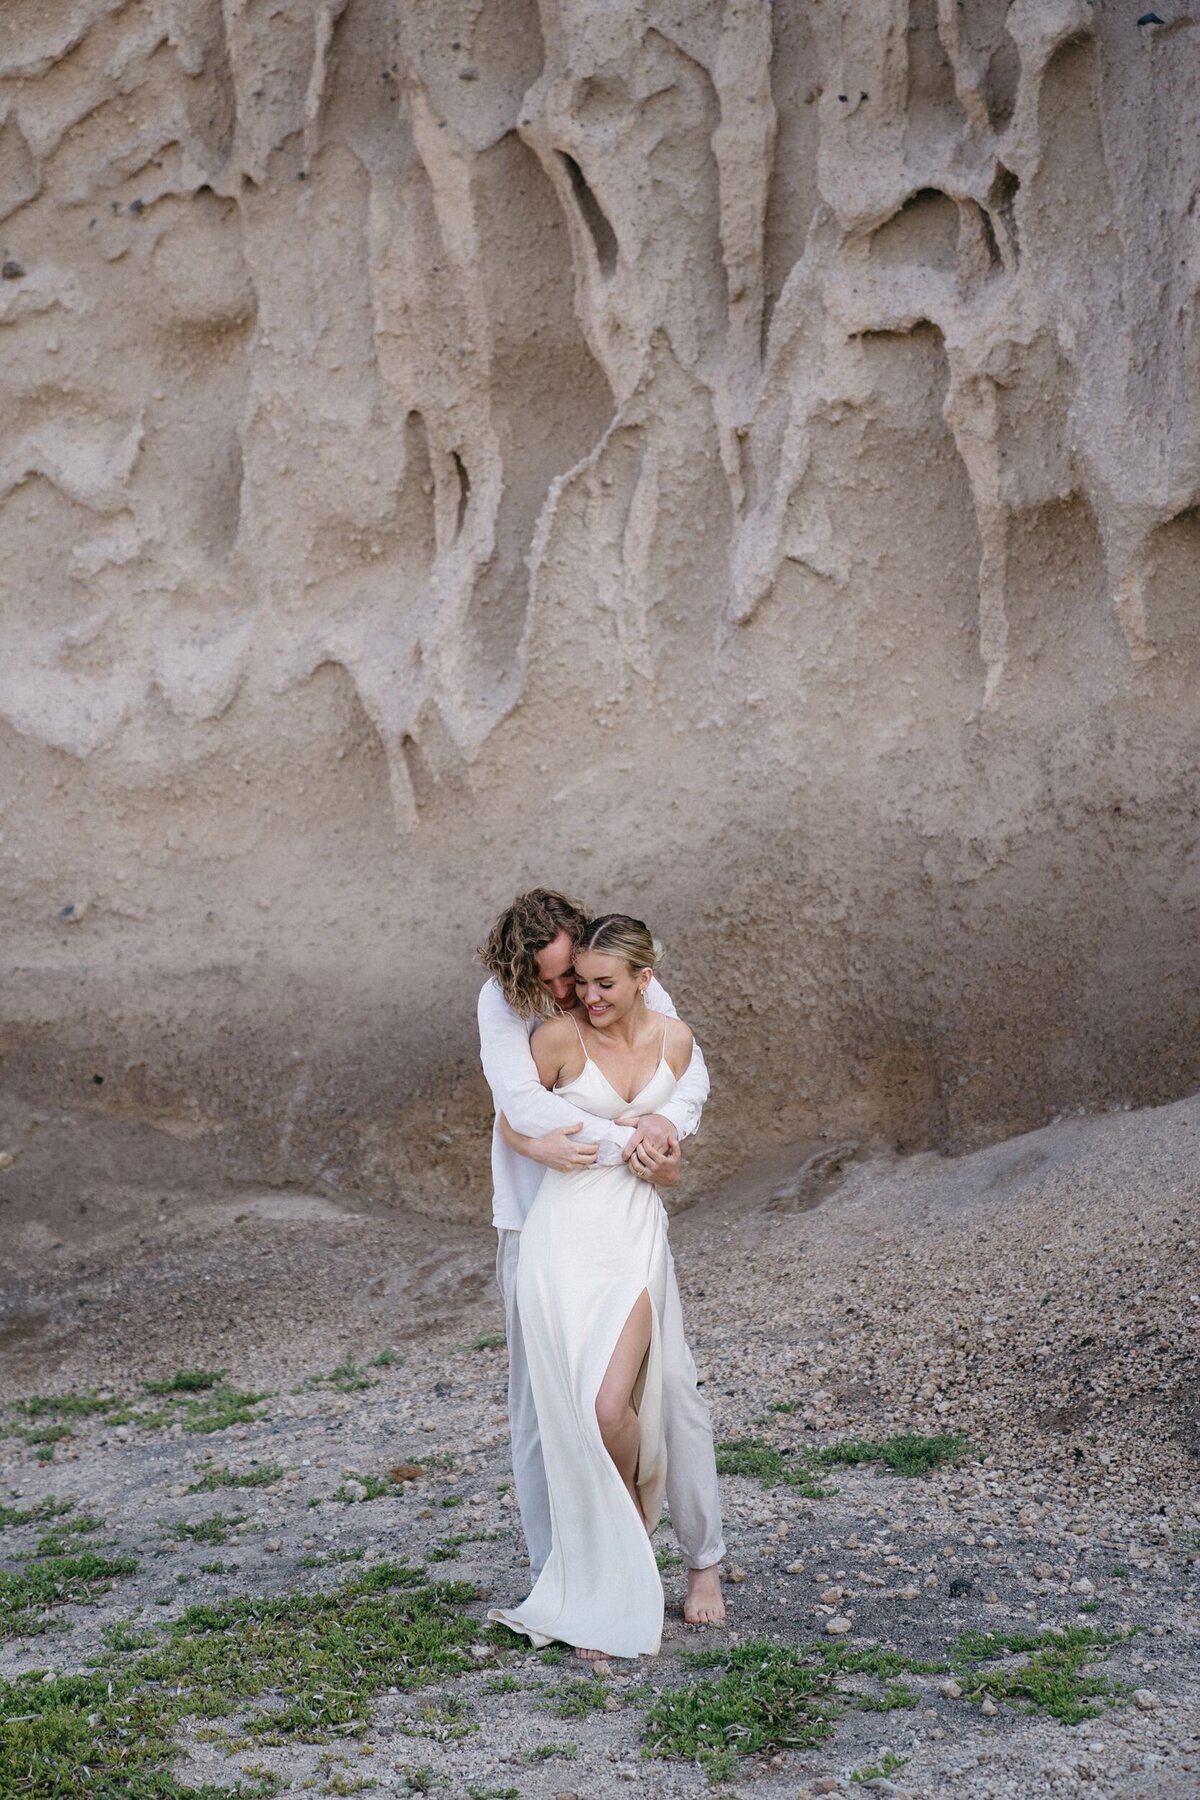 Makayla and Walker's Volcanic Beach Engagement session